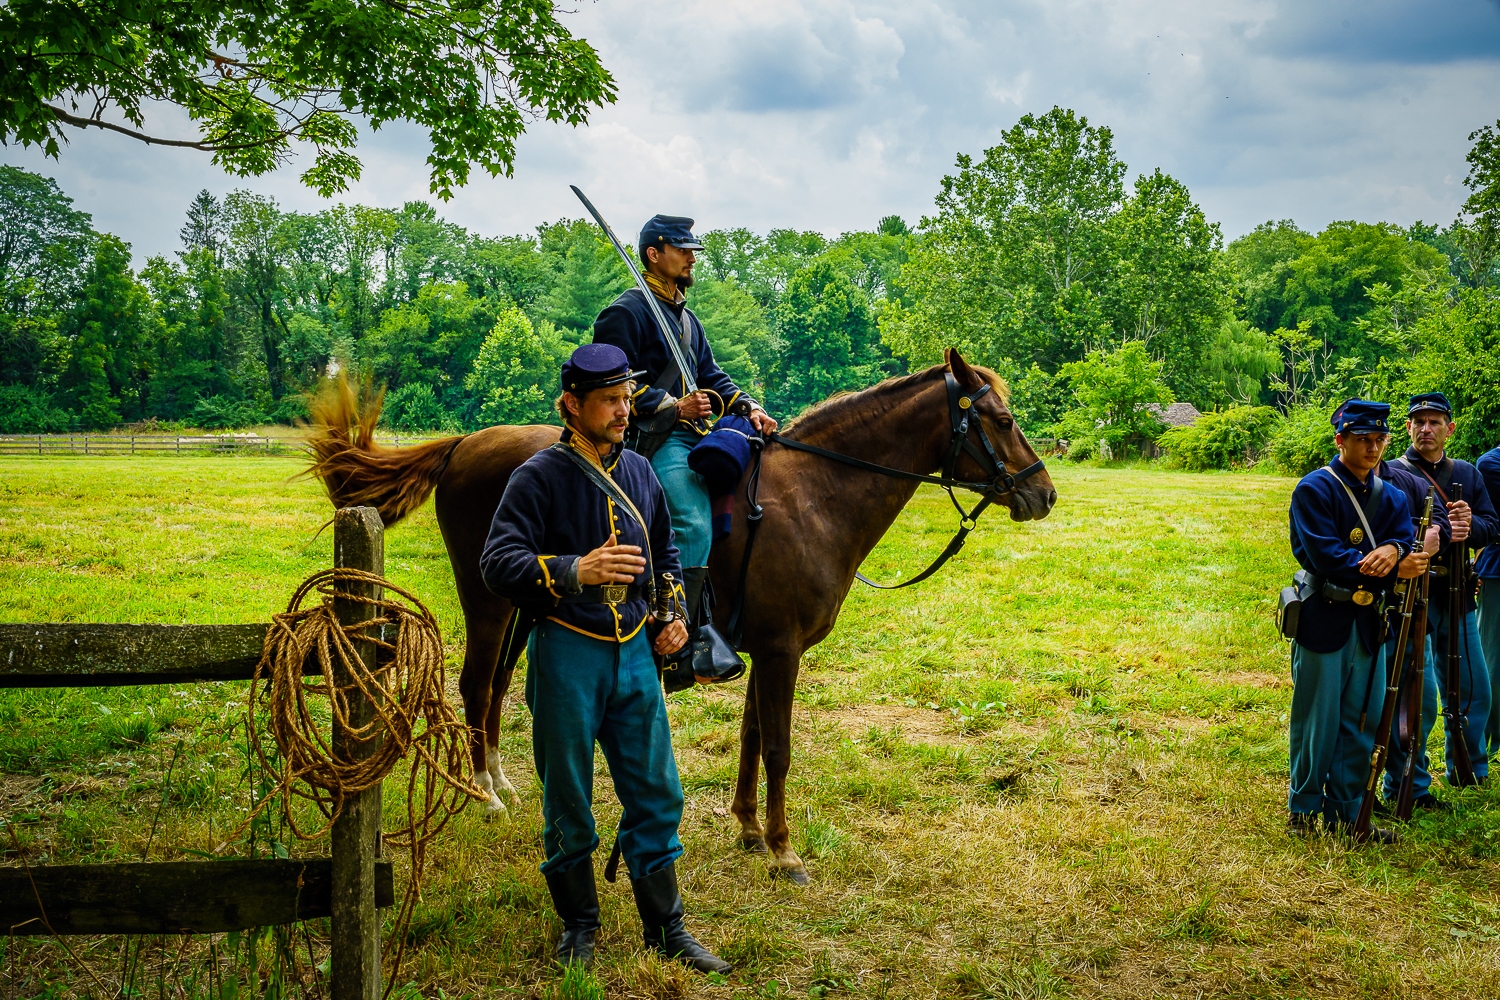 Lancaster, PA, USA – July 16, 2022: Union Army’s Cavalry Soldiers explain their duties and tactics to visitors at the Landis Valley Farm Museum during the Civil War Weekend Event.